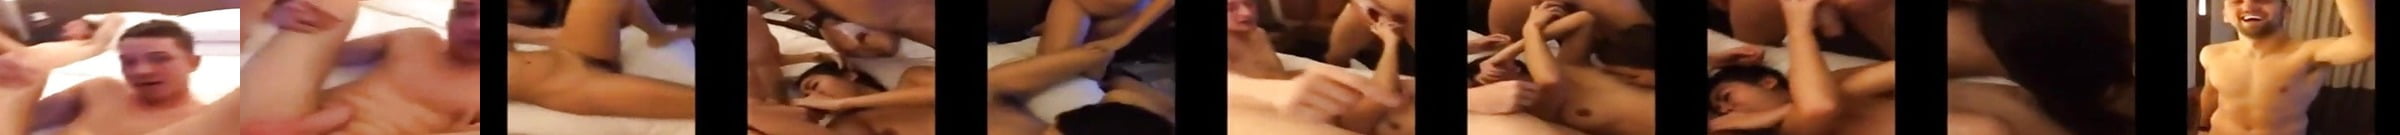 Sex Tape Leicester City Racist Orgy Scandal Fucking Hot Xhamster